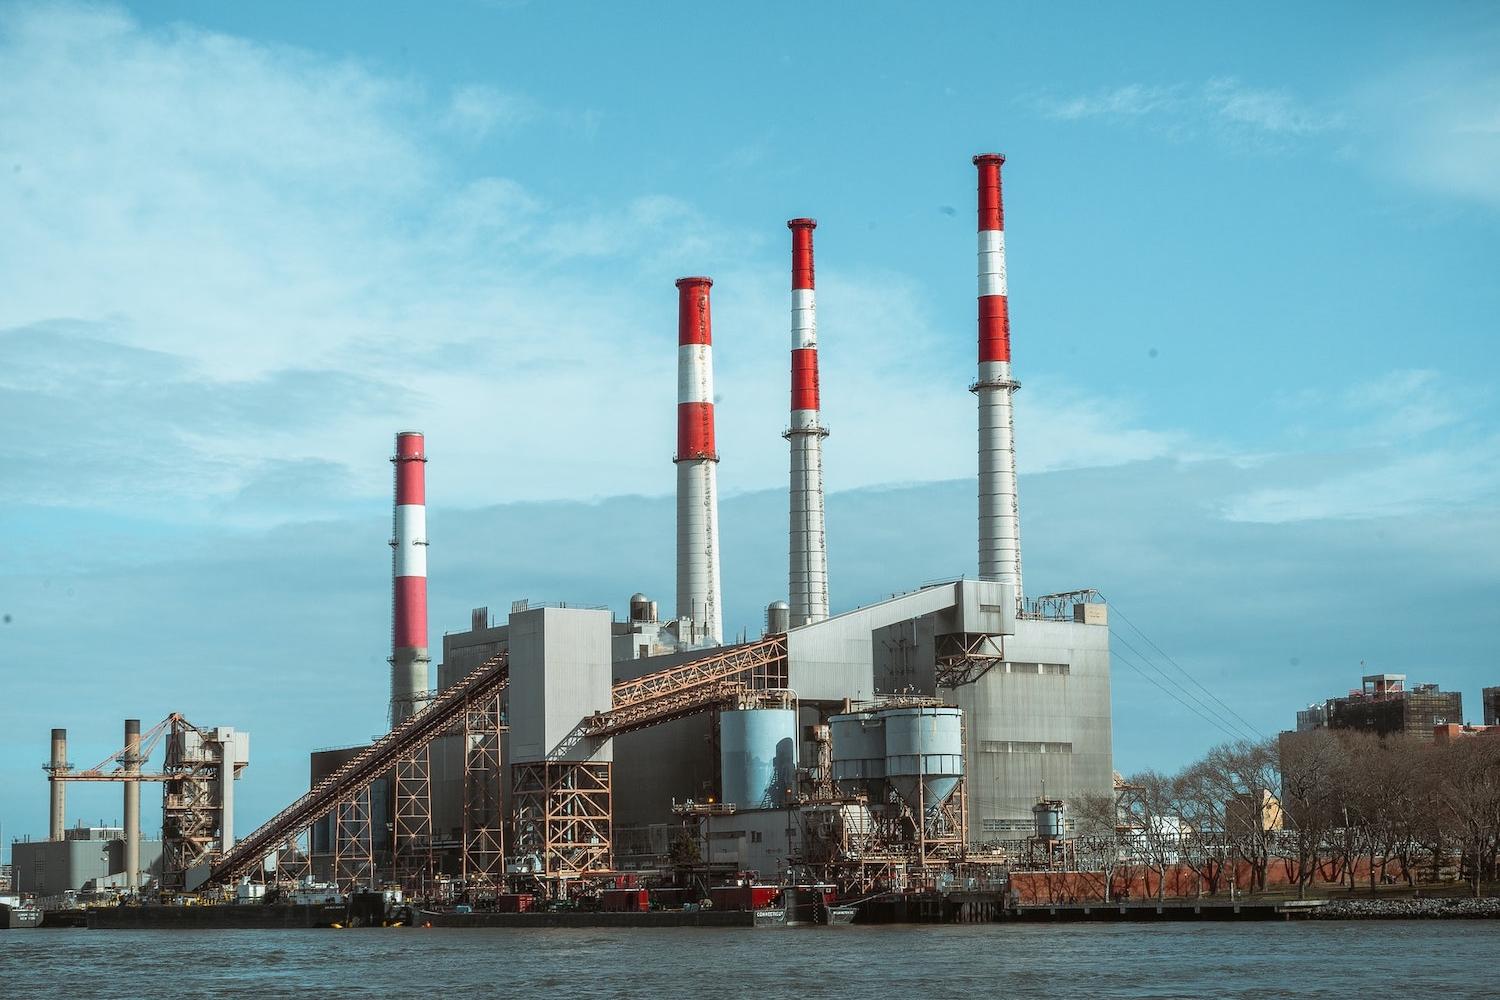 New York Power Plant - EPA looks to regulate GHGs with Clean Power Plan